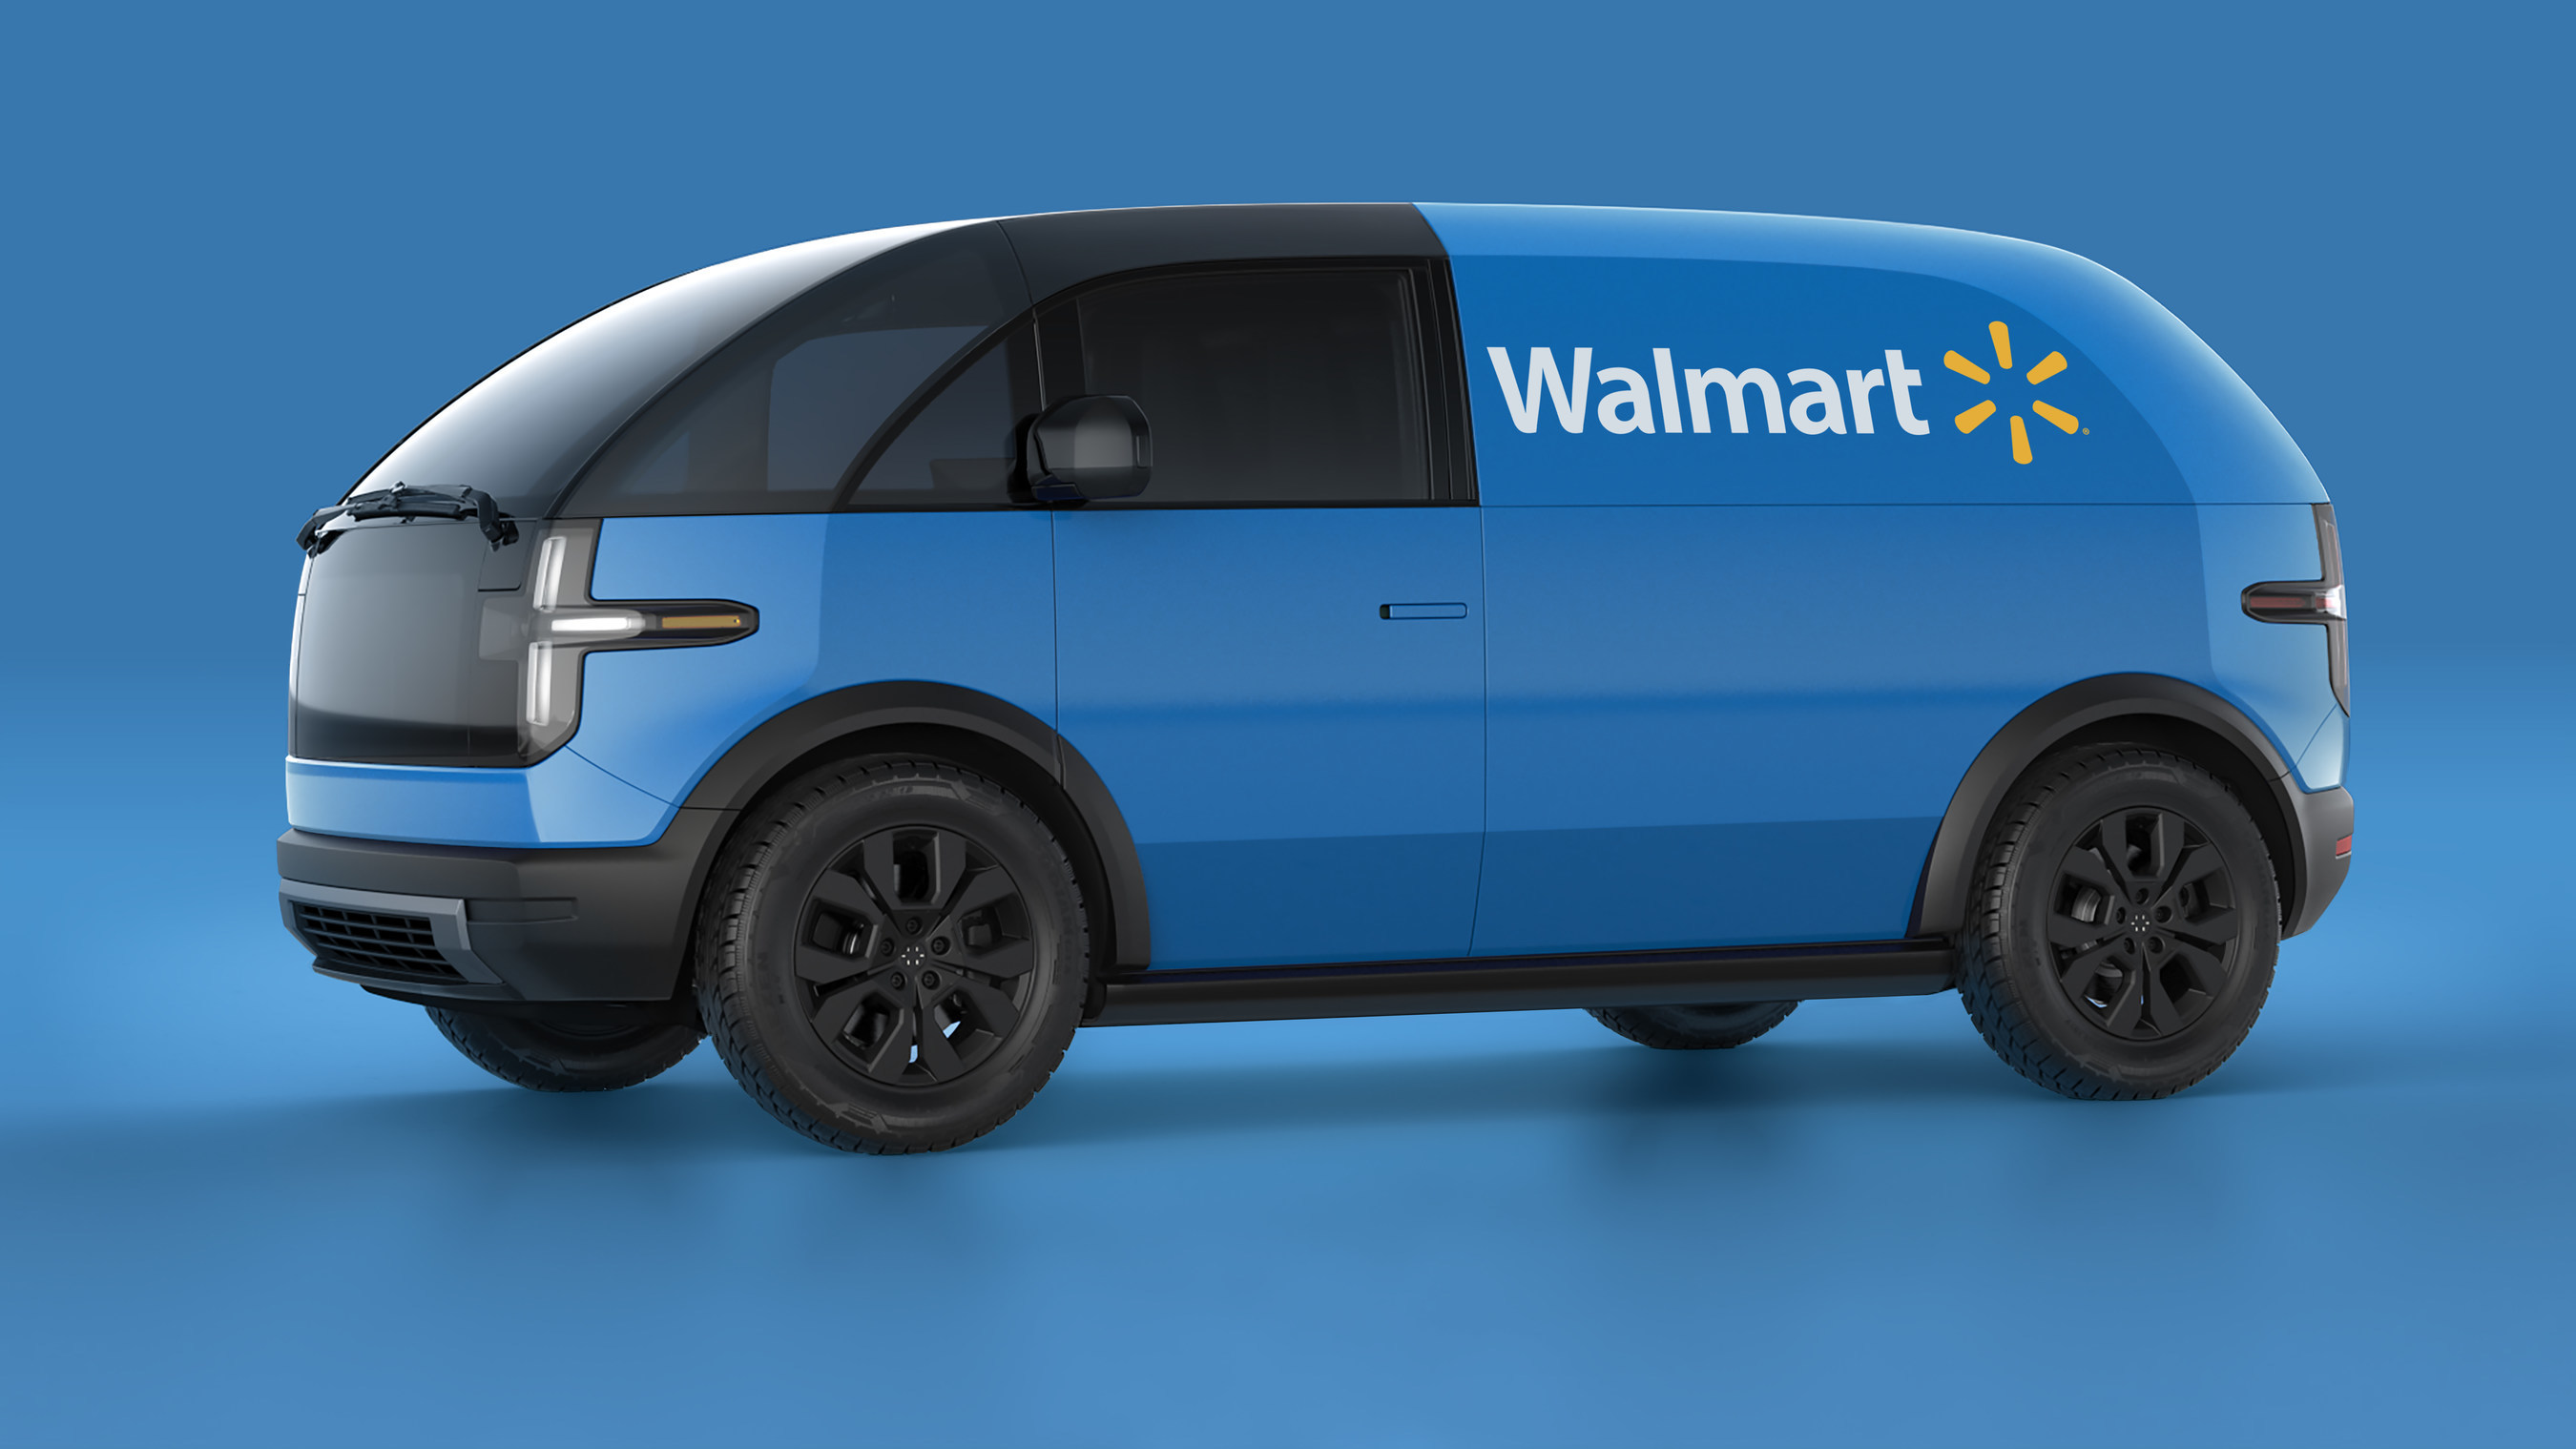 Blue Canoo lifestyle delivery vehicle on blue background